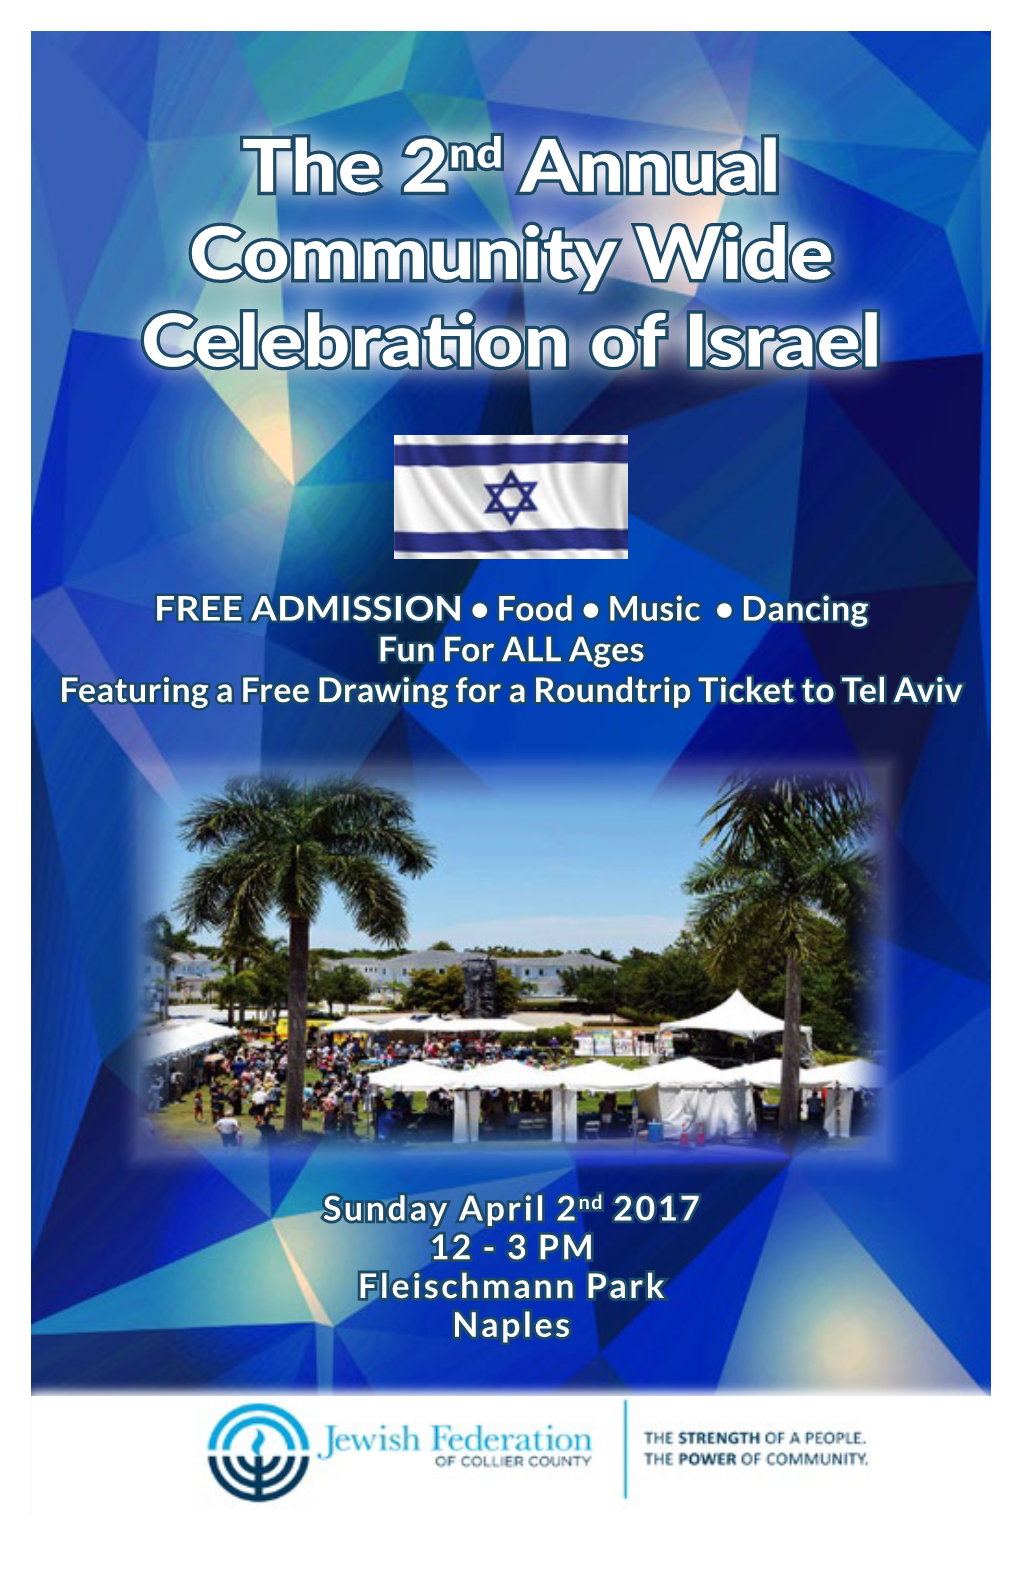 The 2Nd Annual Community Wide Celebration of Israel